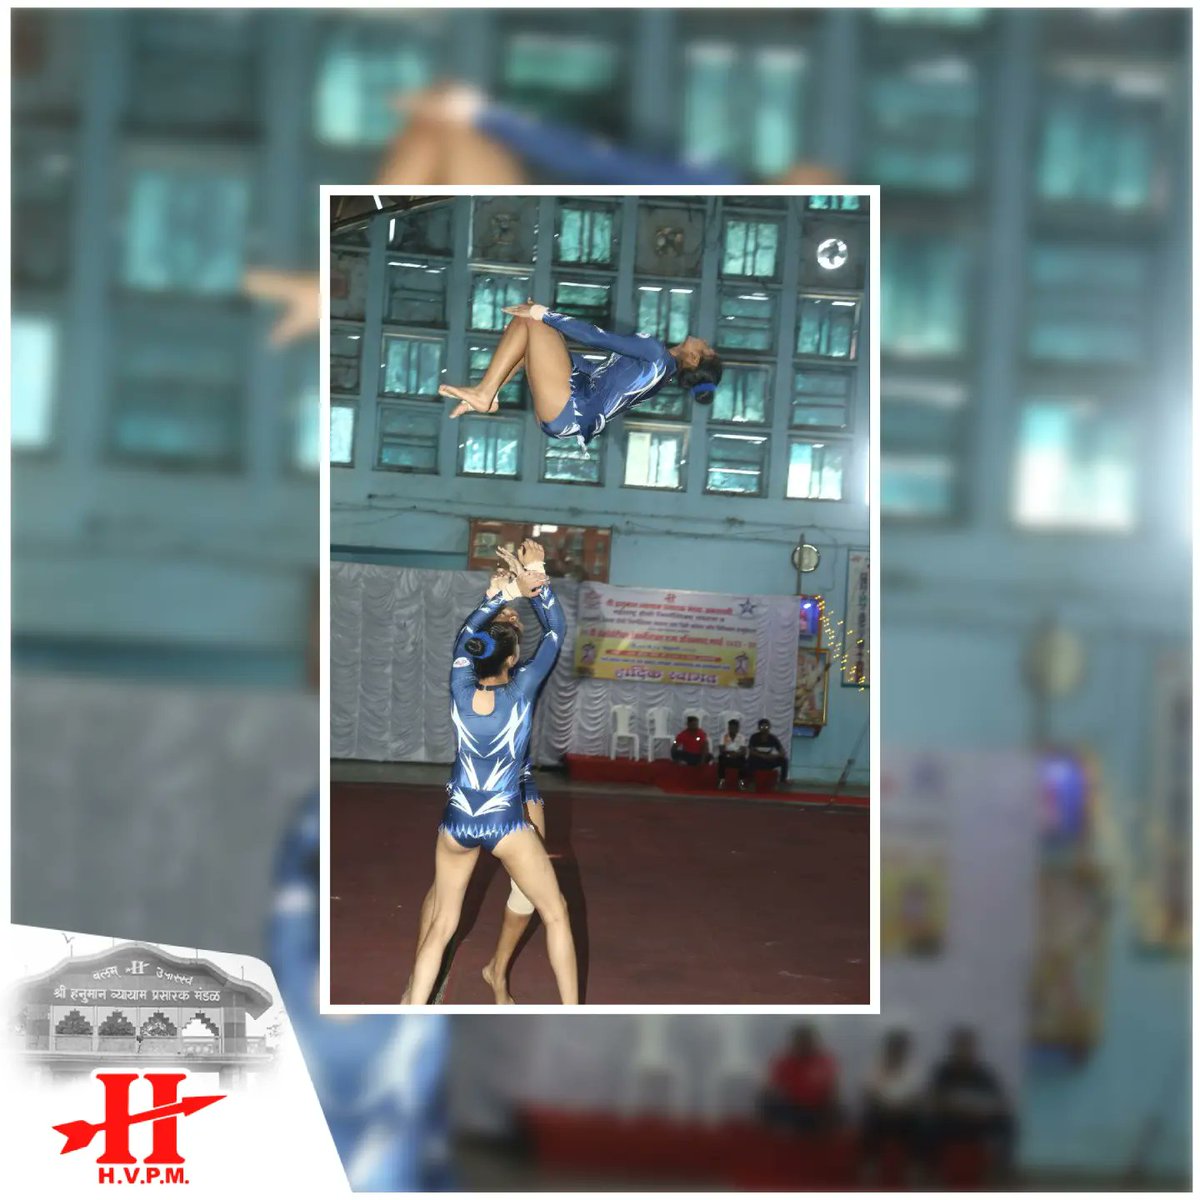 🤸‍♂️🤸 Reliving some more incredible feats of agility and skill from the last day of 29th Acrobatics Gymnastics State Championship, hosted by HVPM and Maharashtra Amateur Gymnastics Association! 👏🙌✨ #Gymnastics #gymnasts #hvpm #maharashtraamateurgymnasticsassociation